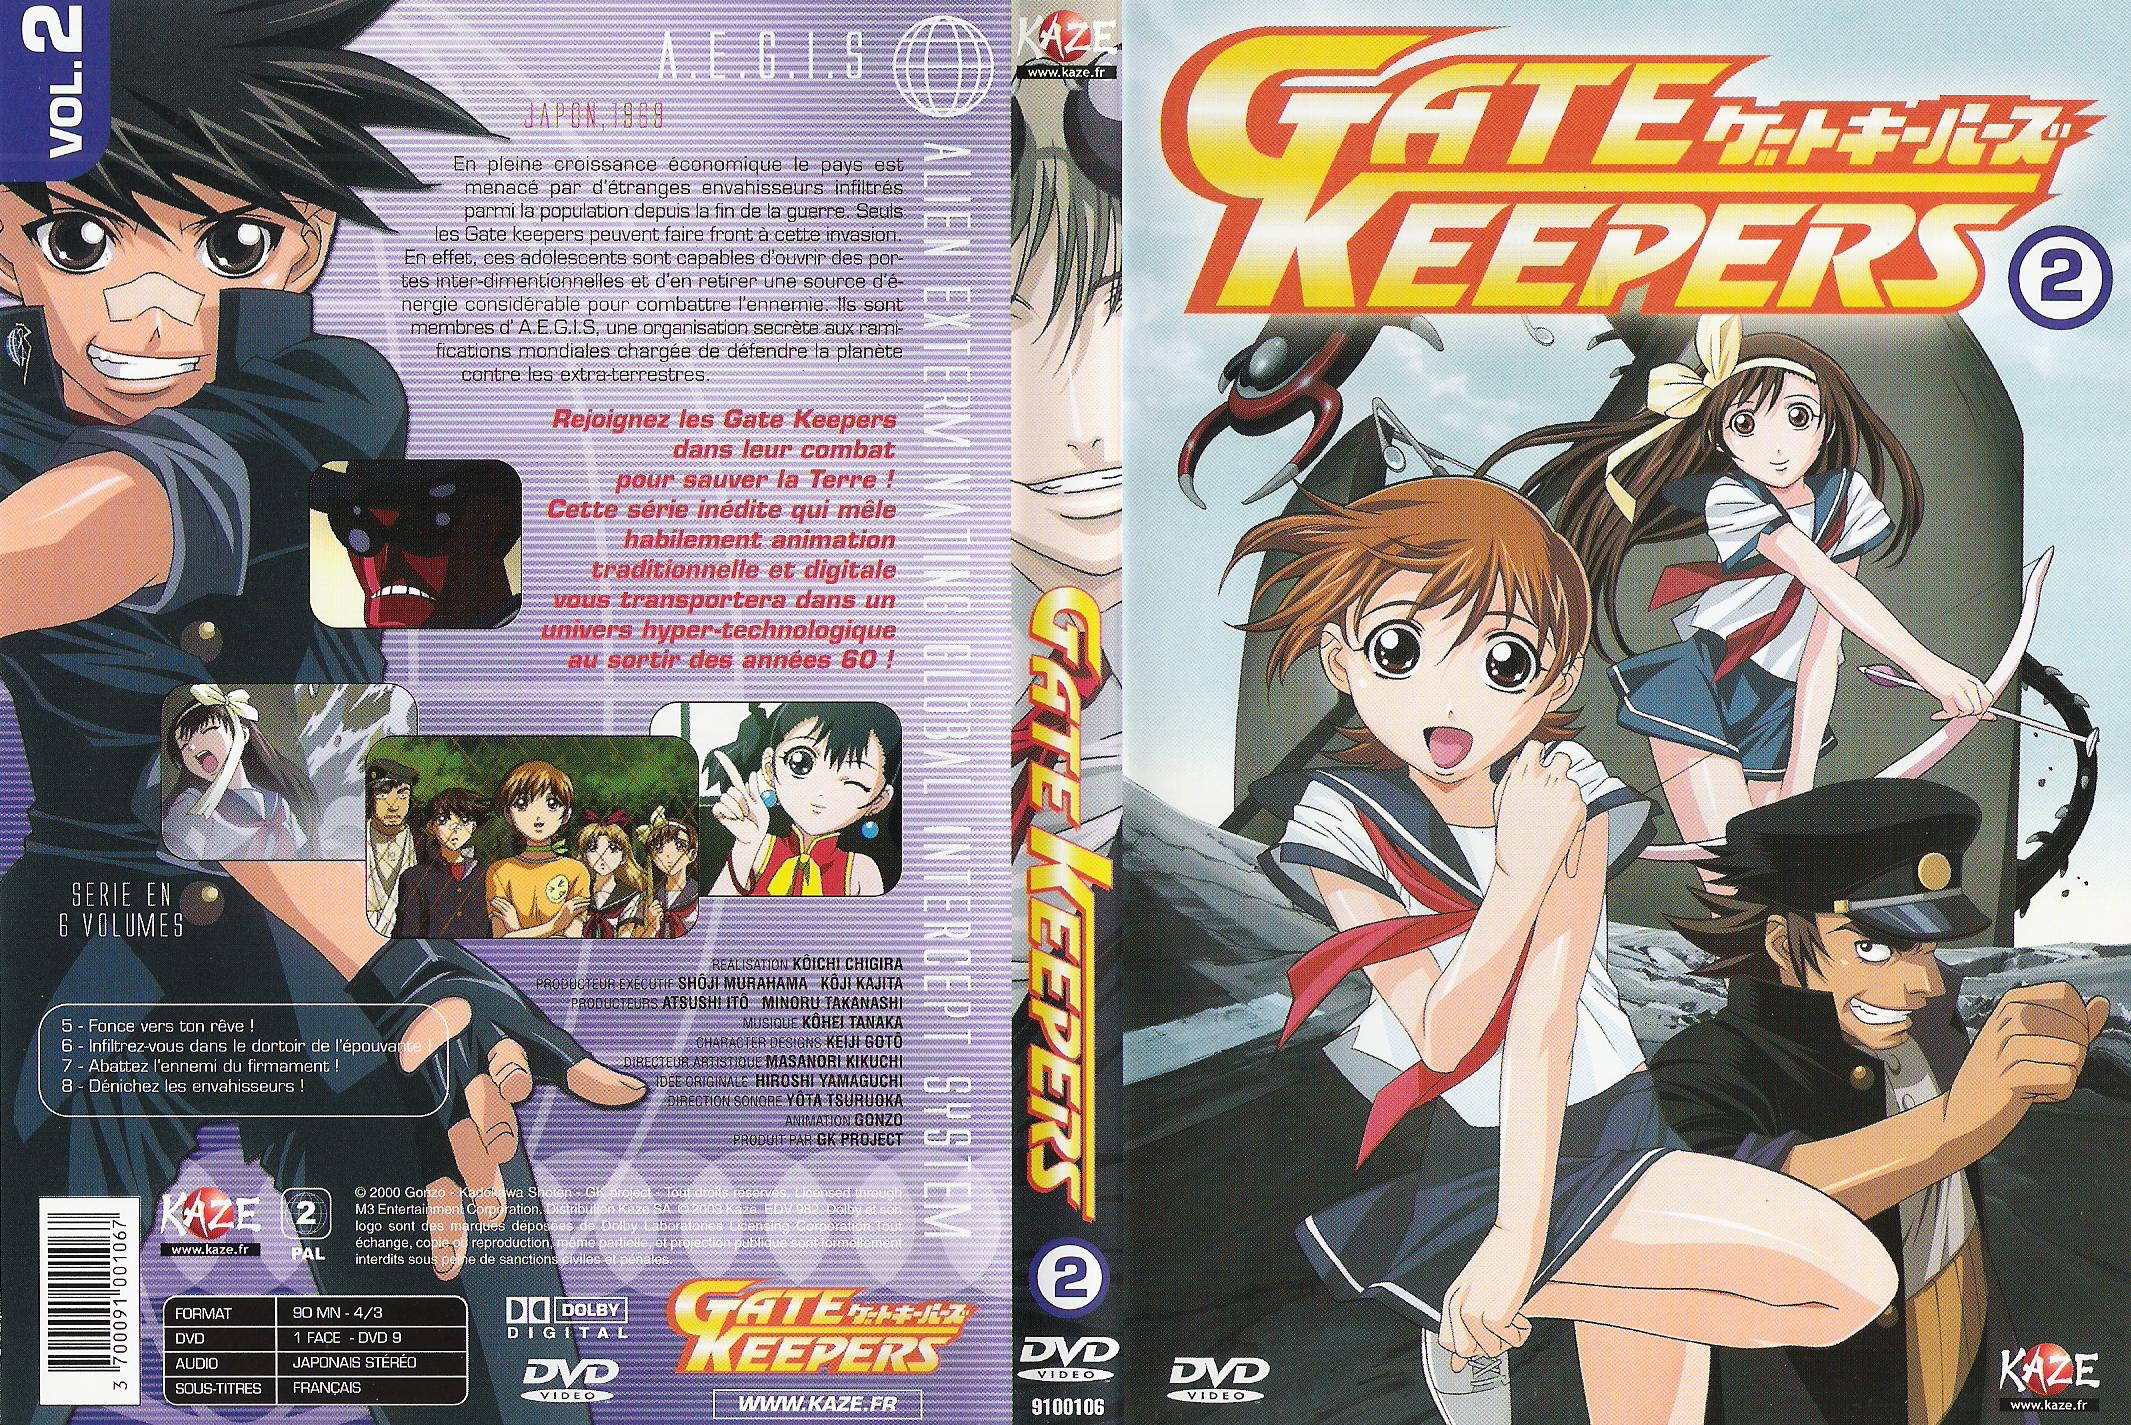 Jaquette DVD Gate Keepers DVD 2